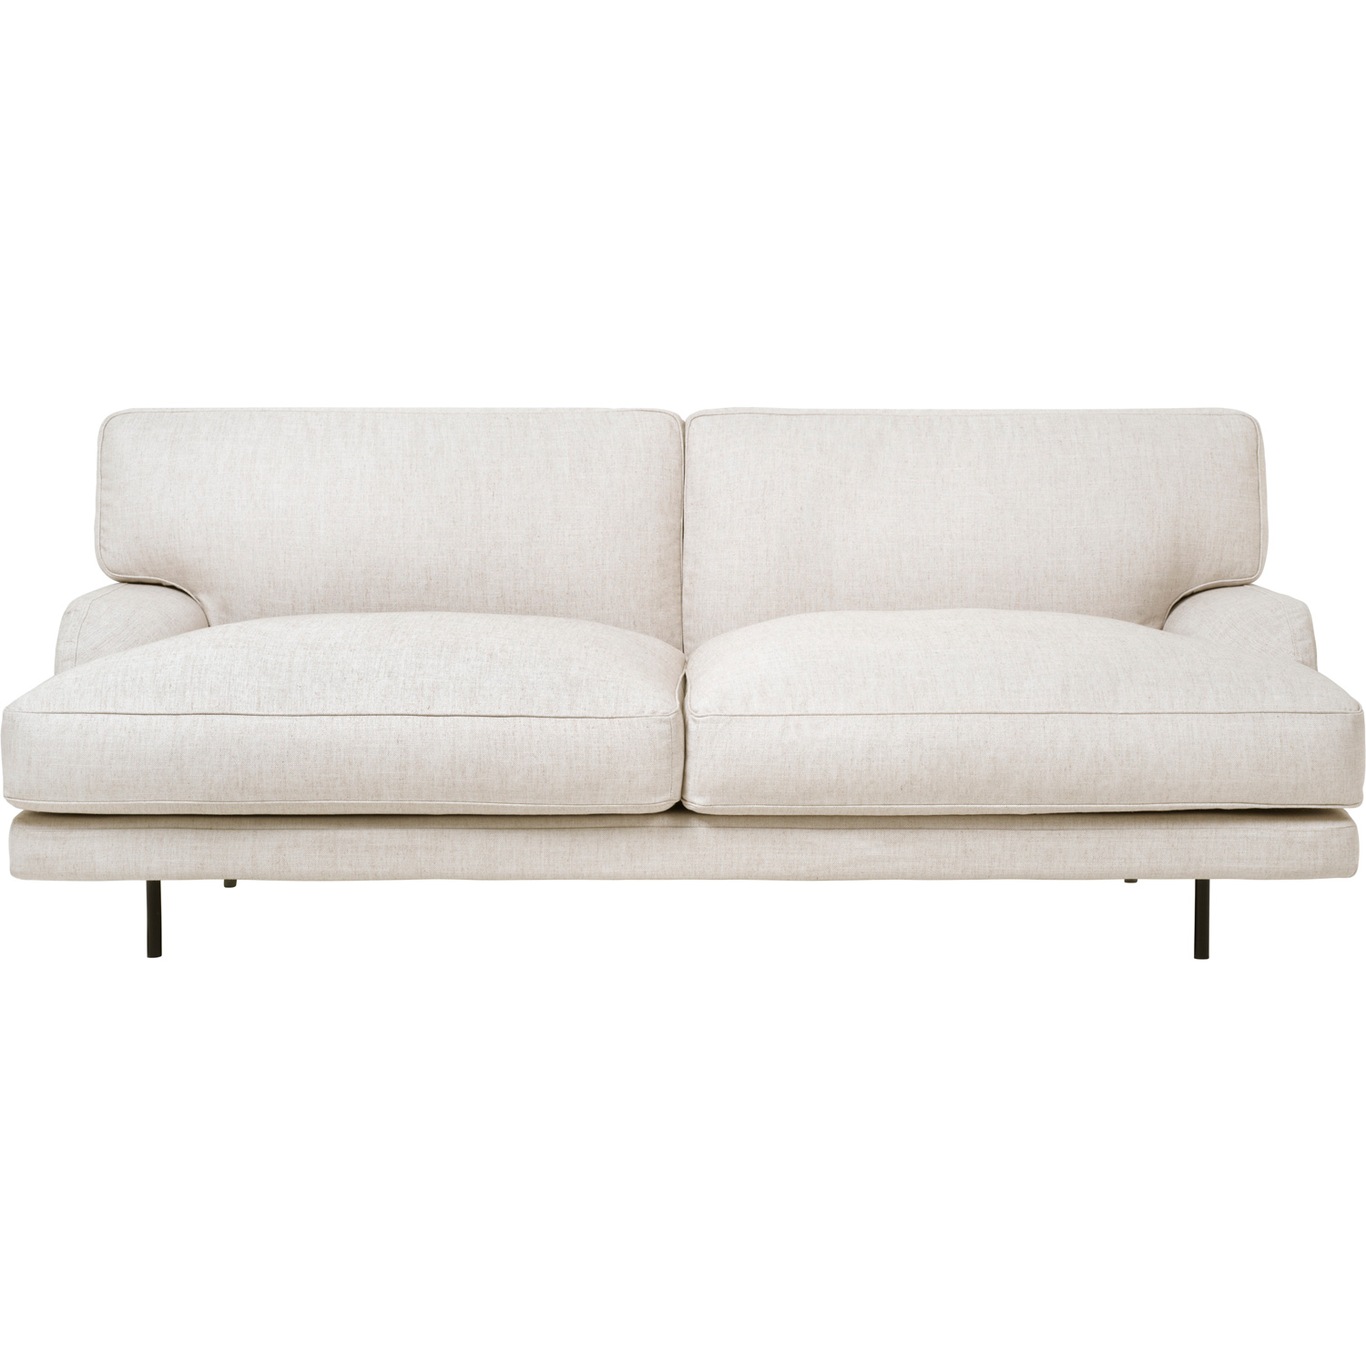 Flaneur Sofa LC 2-Pers, Ben Sort / Hot Madison 419 Off White